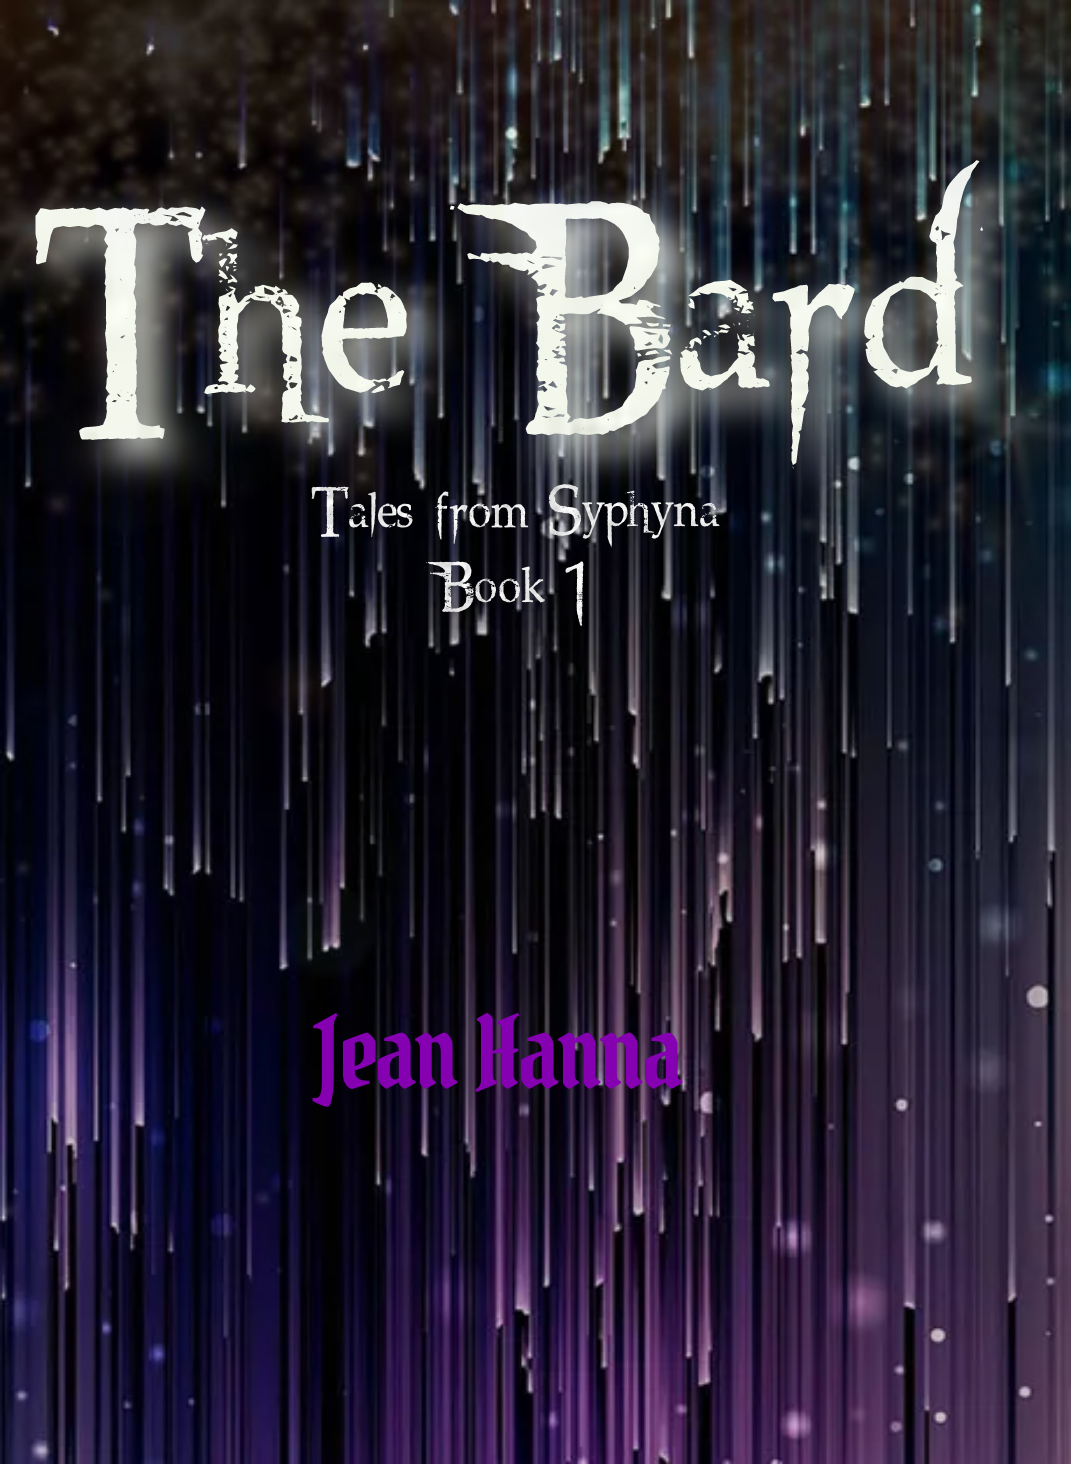 The Bard: Tales from Syphyna Book 1 by Jean Hanna